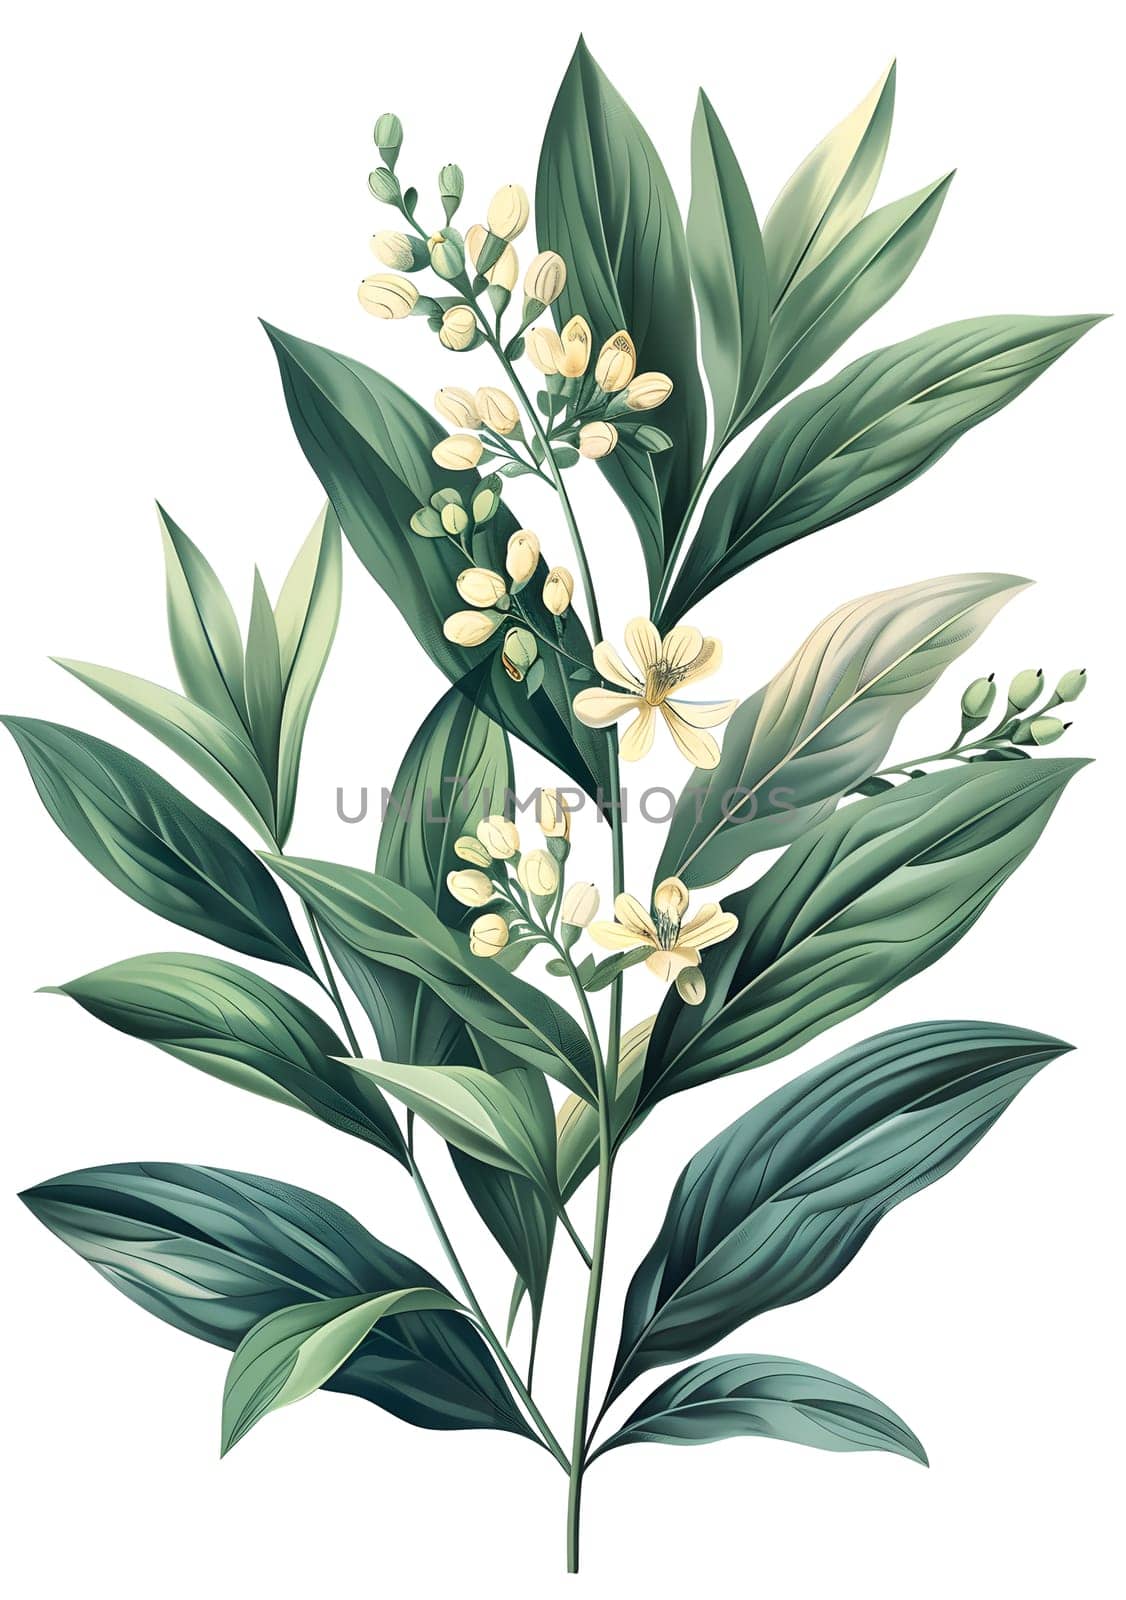 A houseplant with green leaves and yellow flowers is depicted in a painting of a terrestrial plant on a white background, resembling a subshrub or herbaceous plant